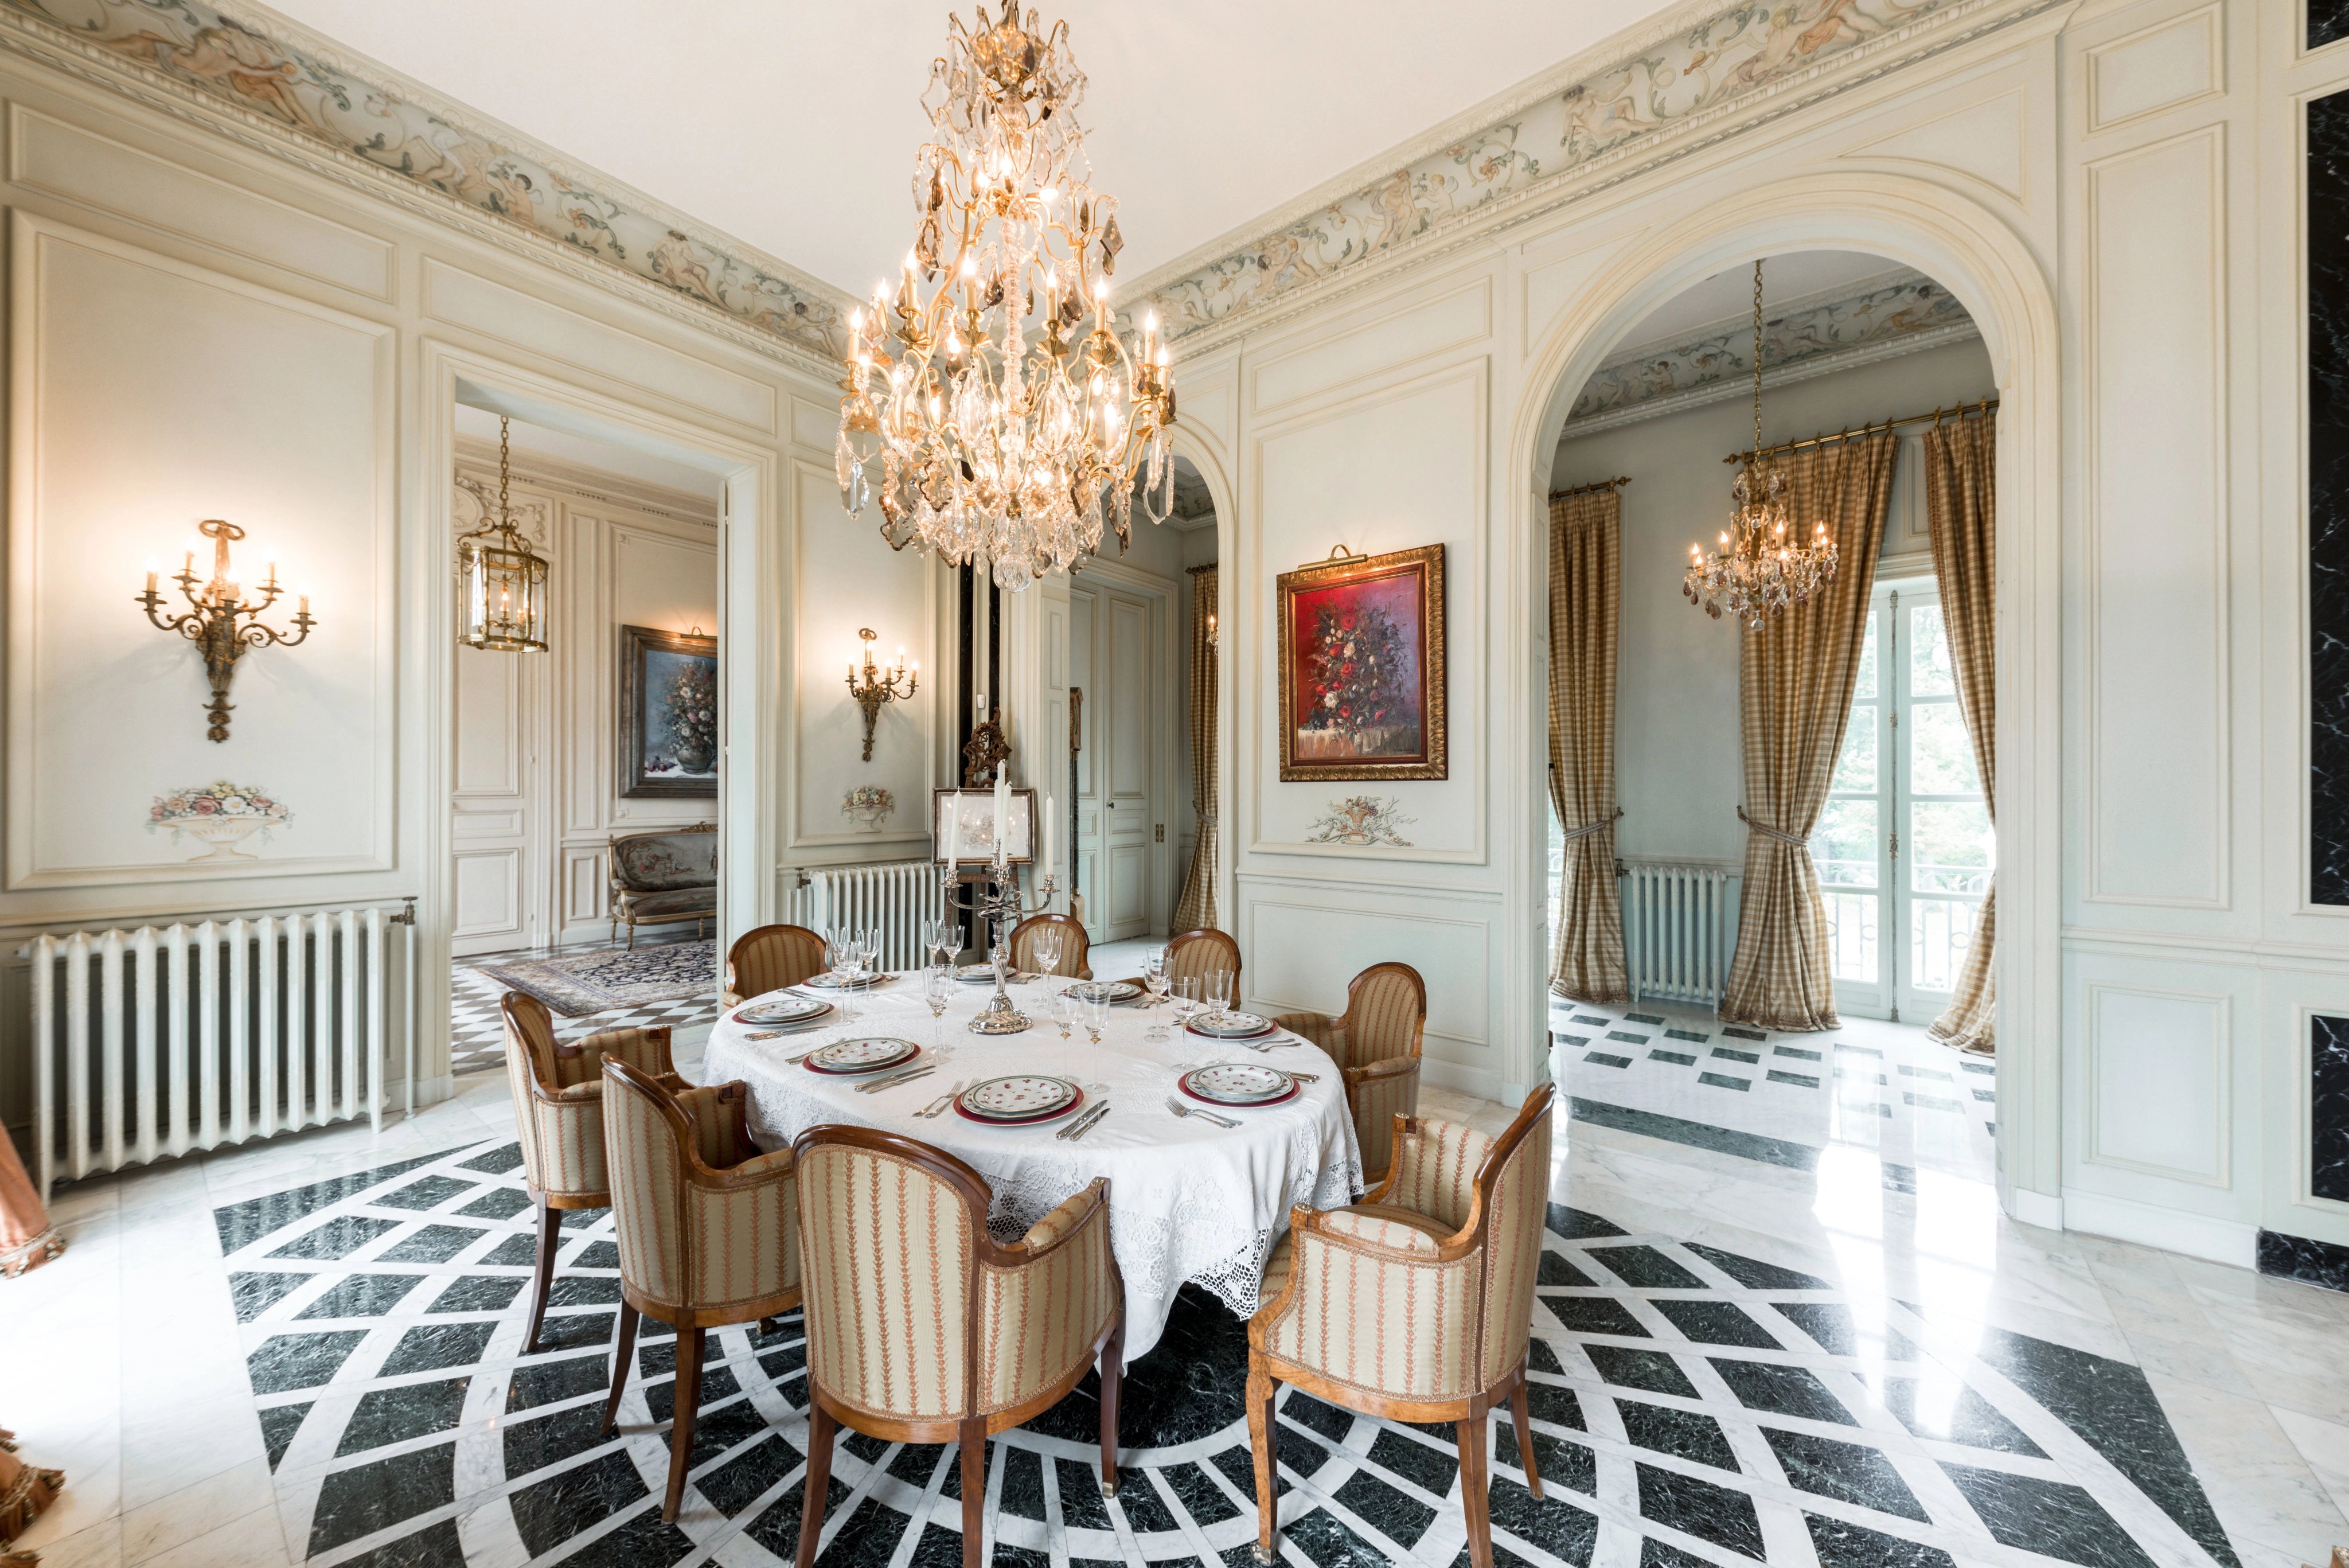 A sublime Palais inspired by Grand Trianon Palace, 20 min from Paris_1340